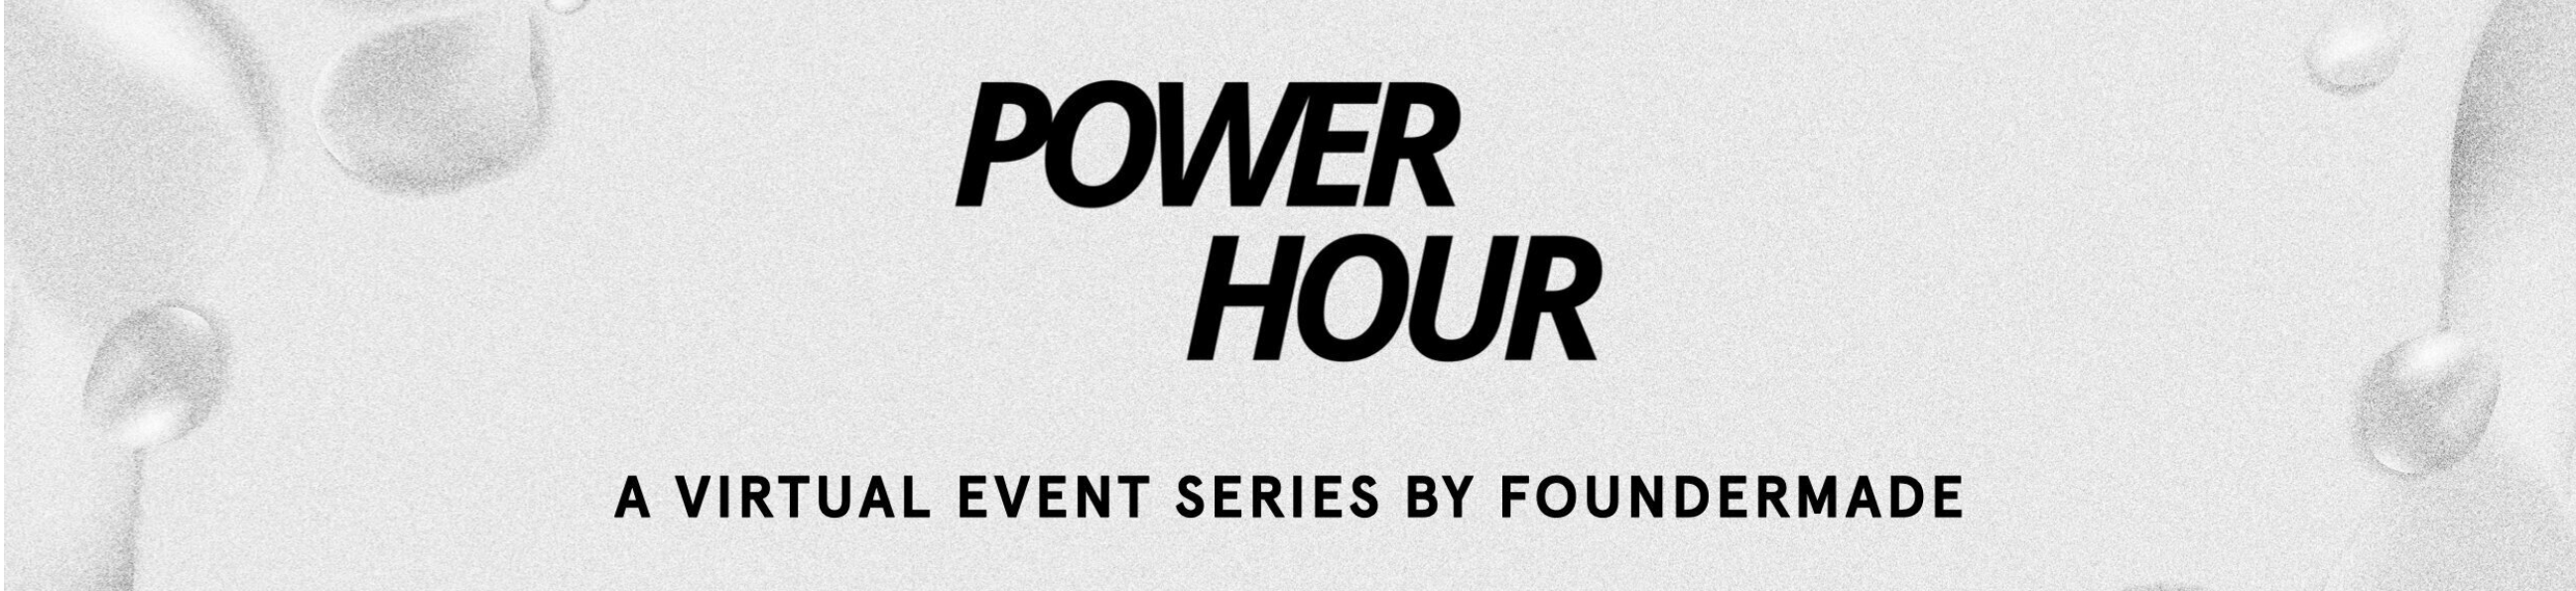 Power Hour A Virtual Event Series by FounderMade | The Collective Rising Events